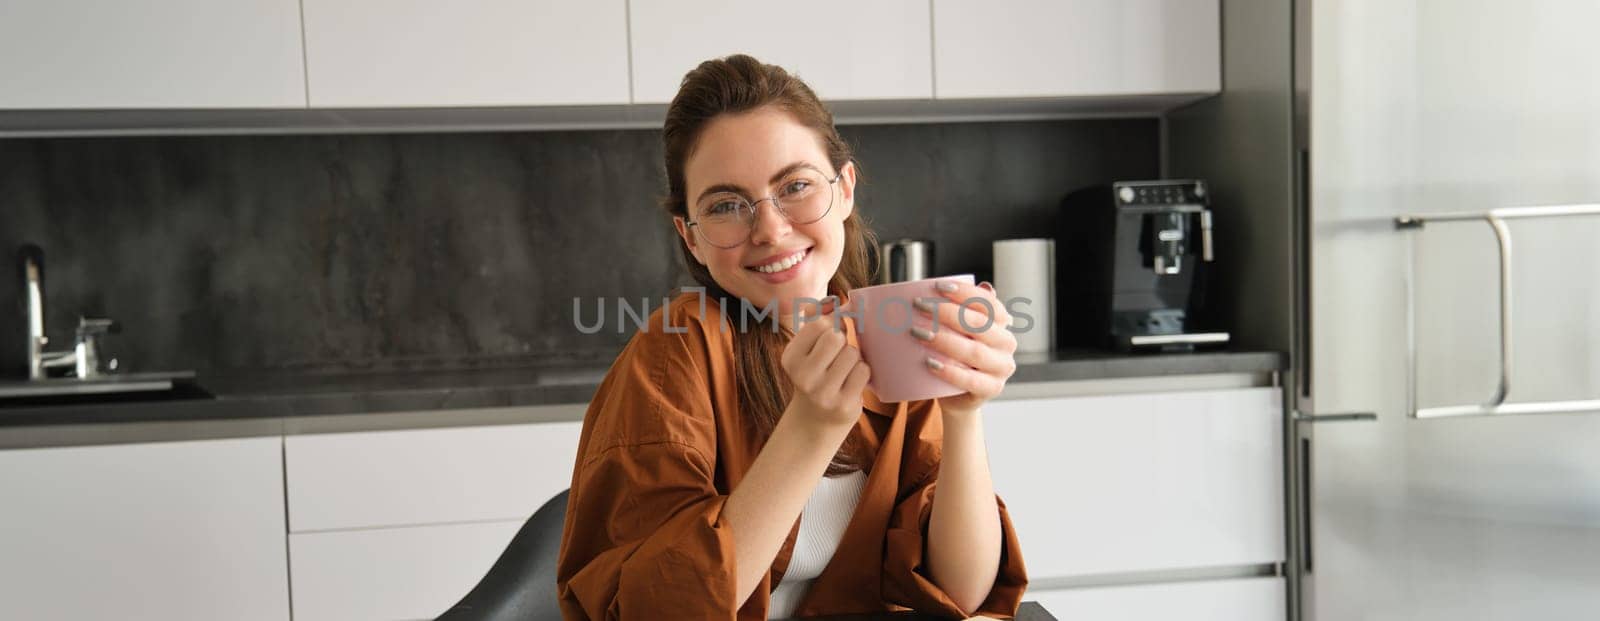 Carefree young woman in kitchen, sitting with cup of coffee and smiling at camera, drinking tea, enjoying her break time.